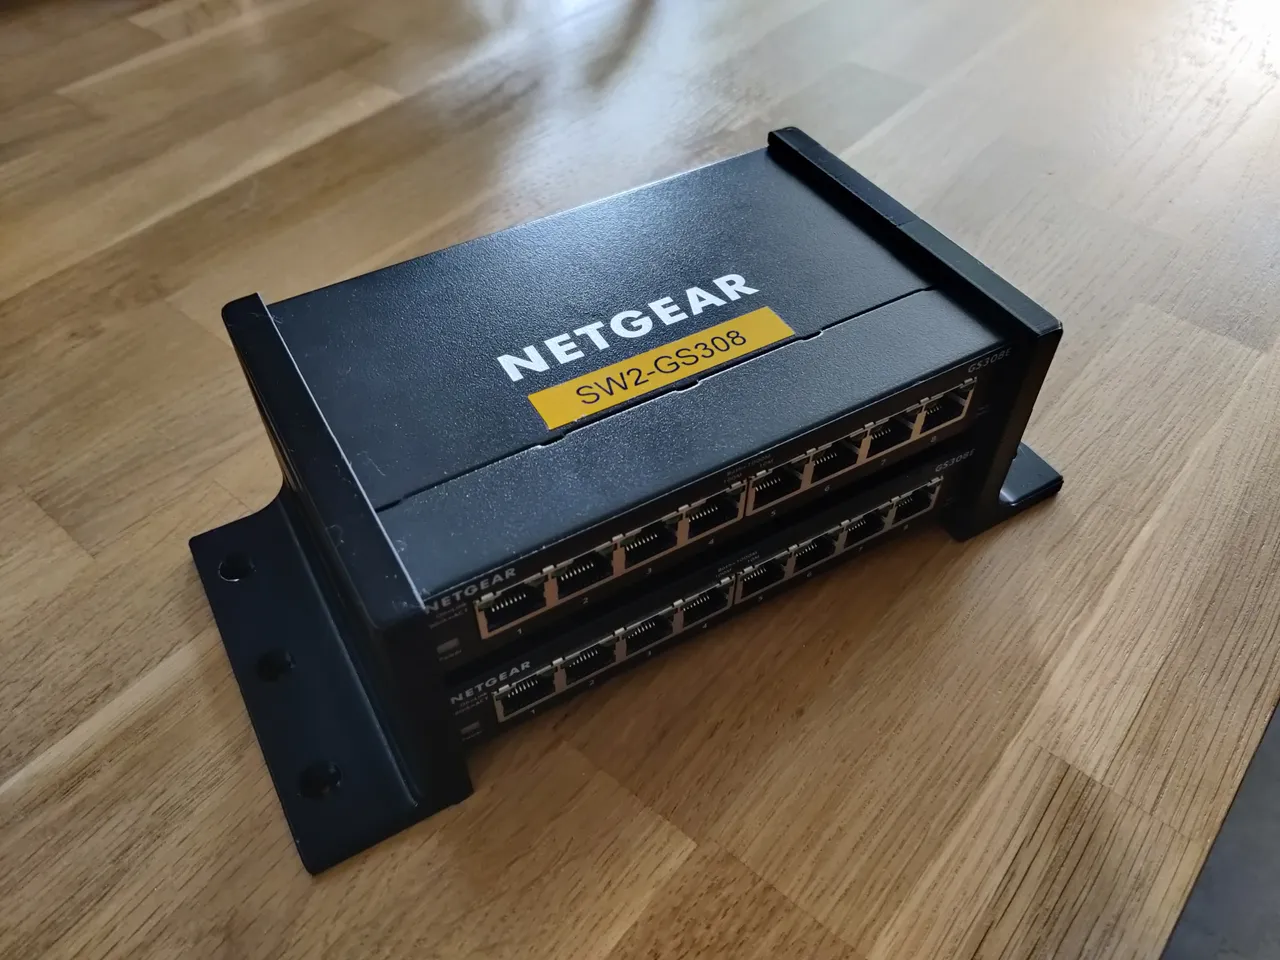 Netgear GS308 Switch Stacked Wall Mount by thomasvnl